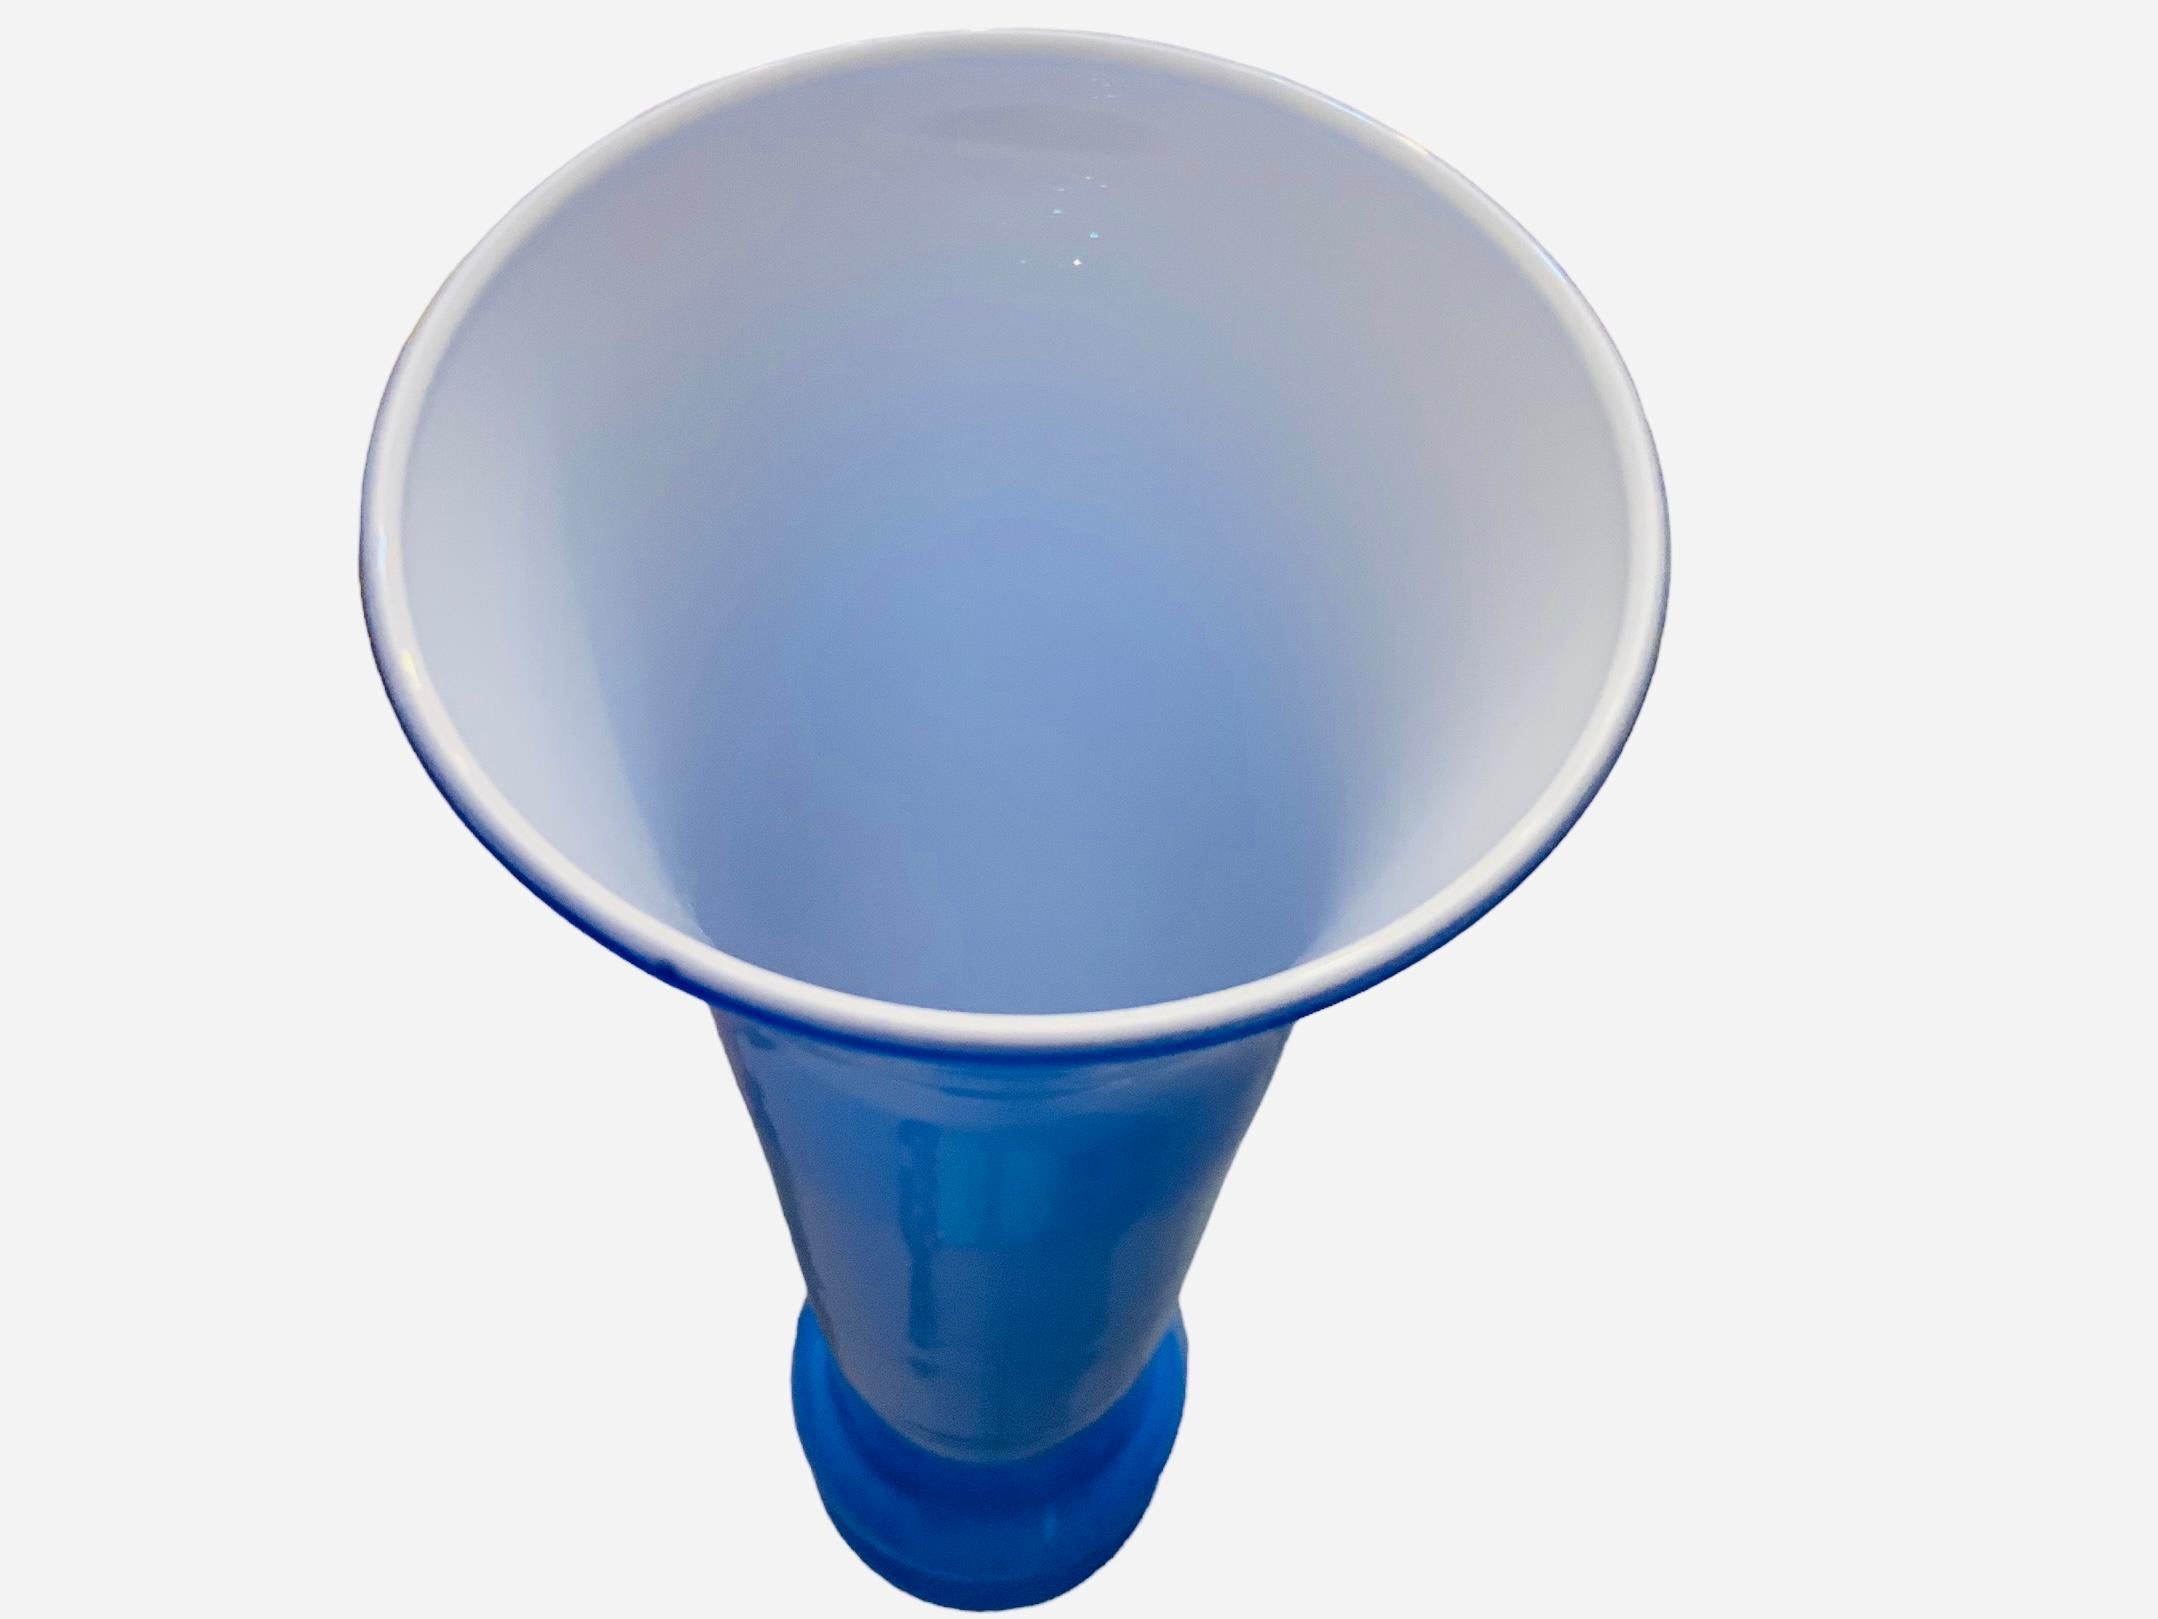 This is an Art Glass royal blue and white glass vase. It depicts a tall fluted royal blue glass base adorned with two rings made of the same glass in the lower body of the base. The inside of the vase is white. The vase is attached to a round clear